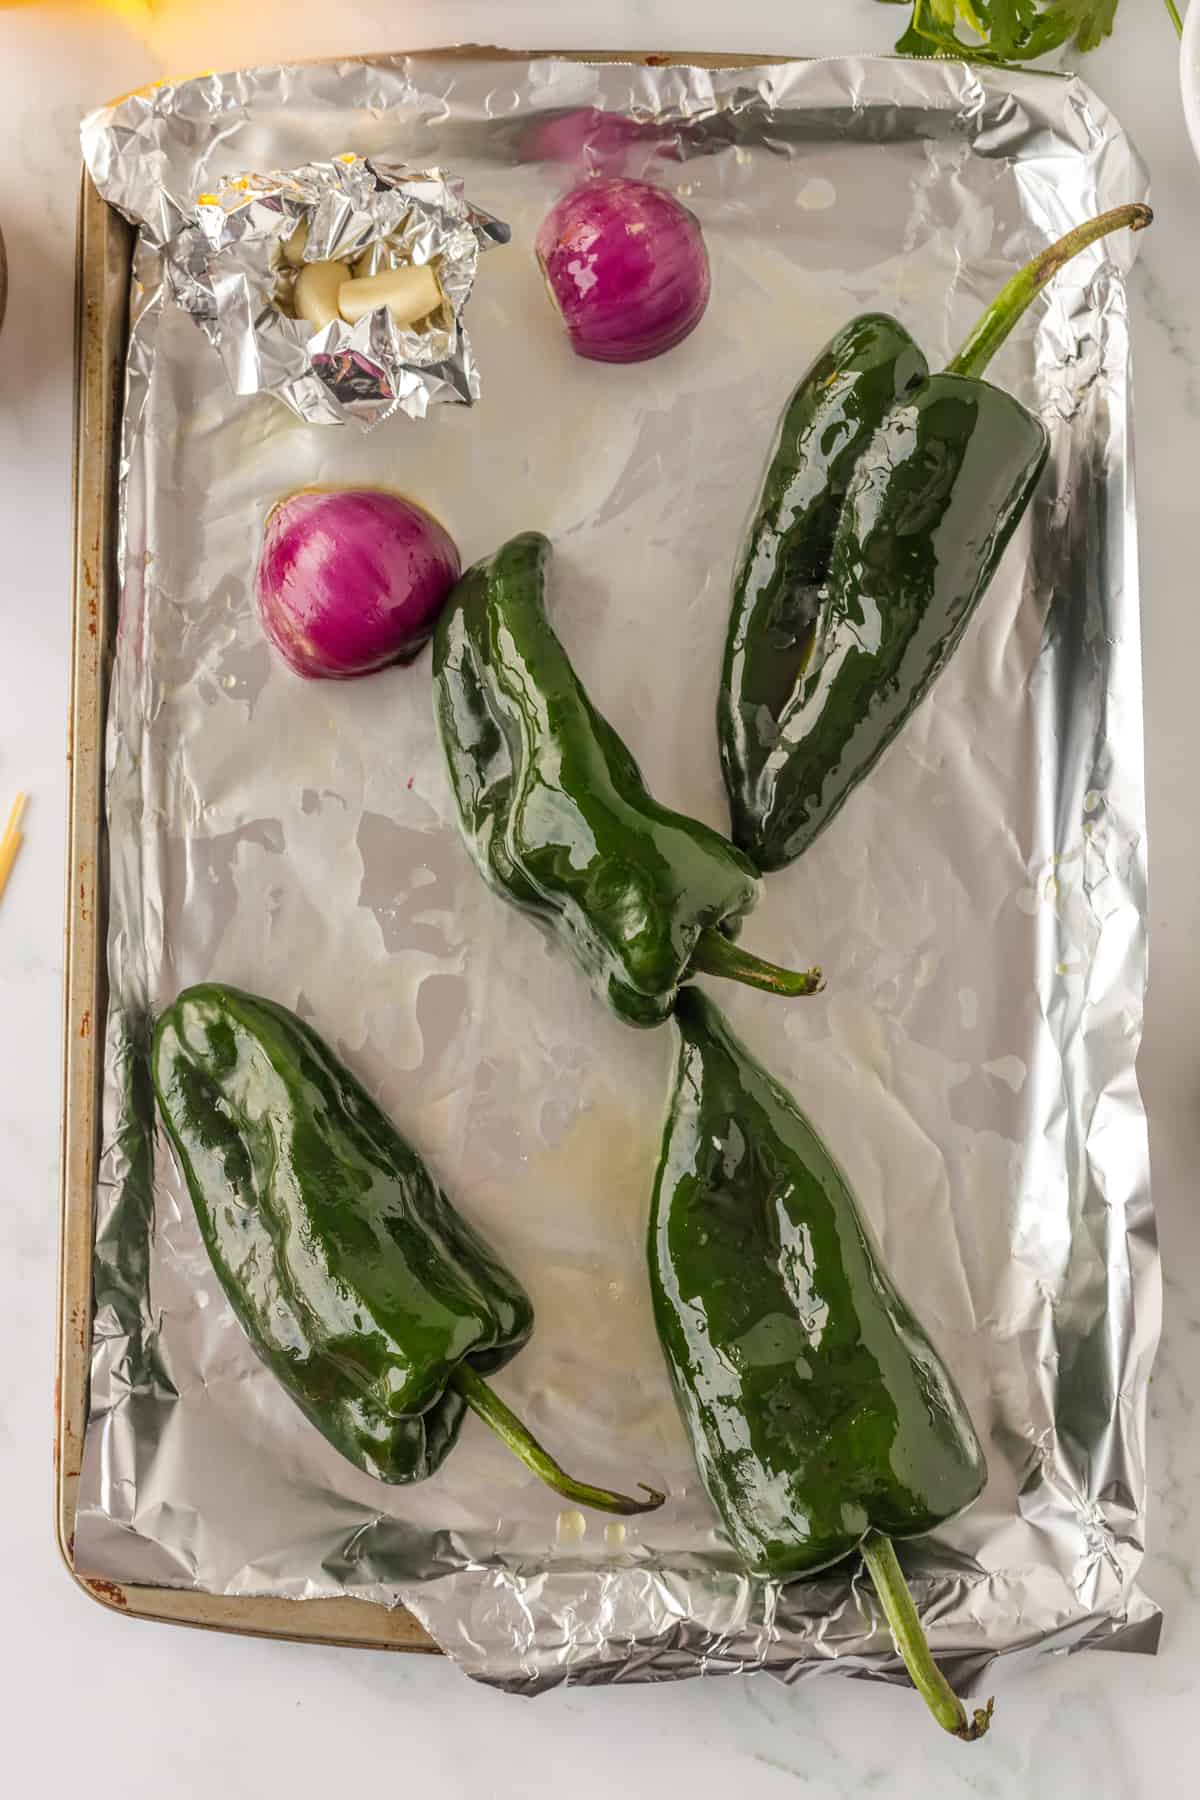 poblano peppers, onion and garlic on a sheet pan ready to be cooked.